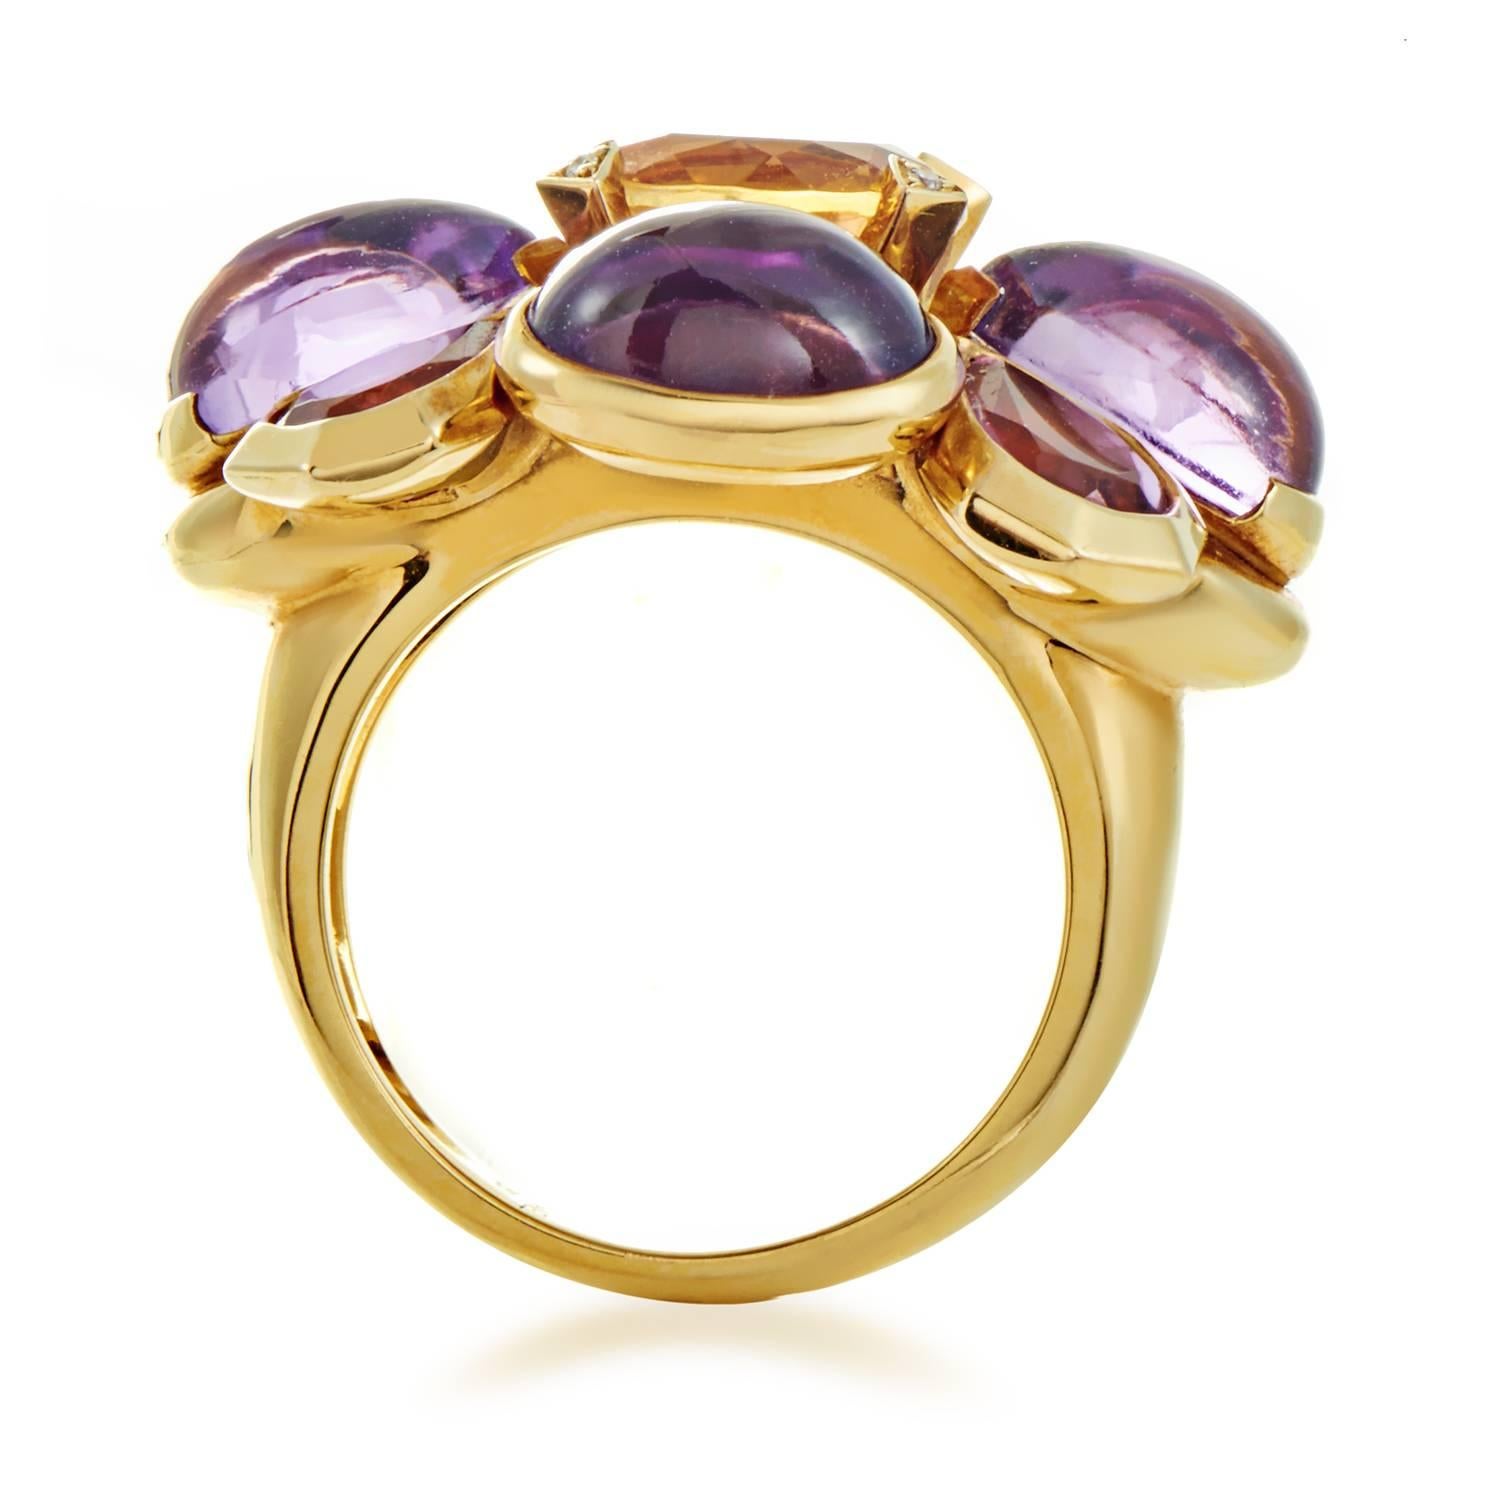 Creating an extraordinary sight that easily catches your eye and captivates your attention with its majestic gem setting, this outstanding 18K yellow gold ring from Chanel is a tasteful show of flamboyance, boasting a stunning central citrine stone